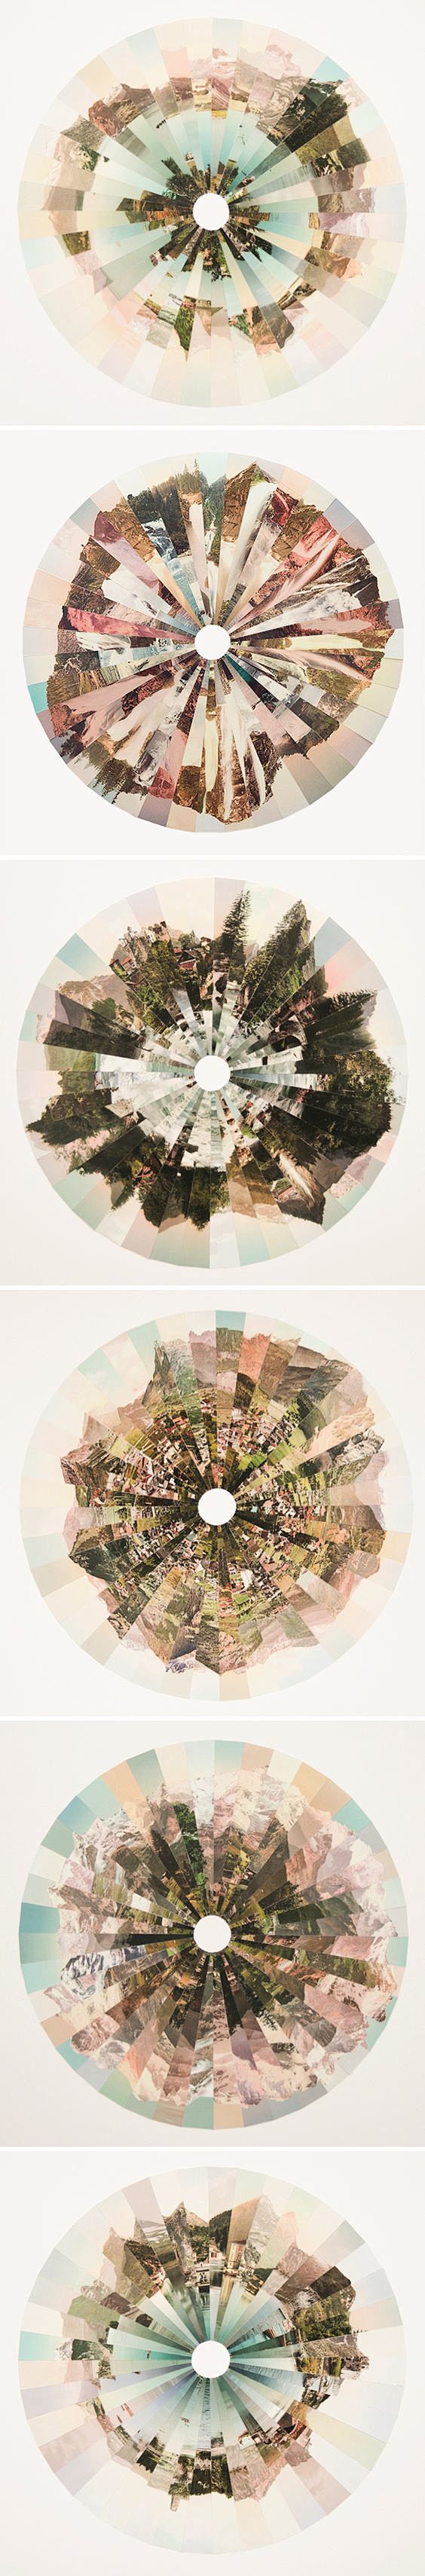 photo collages by li...